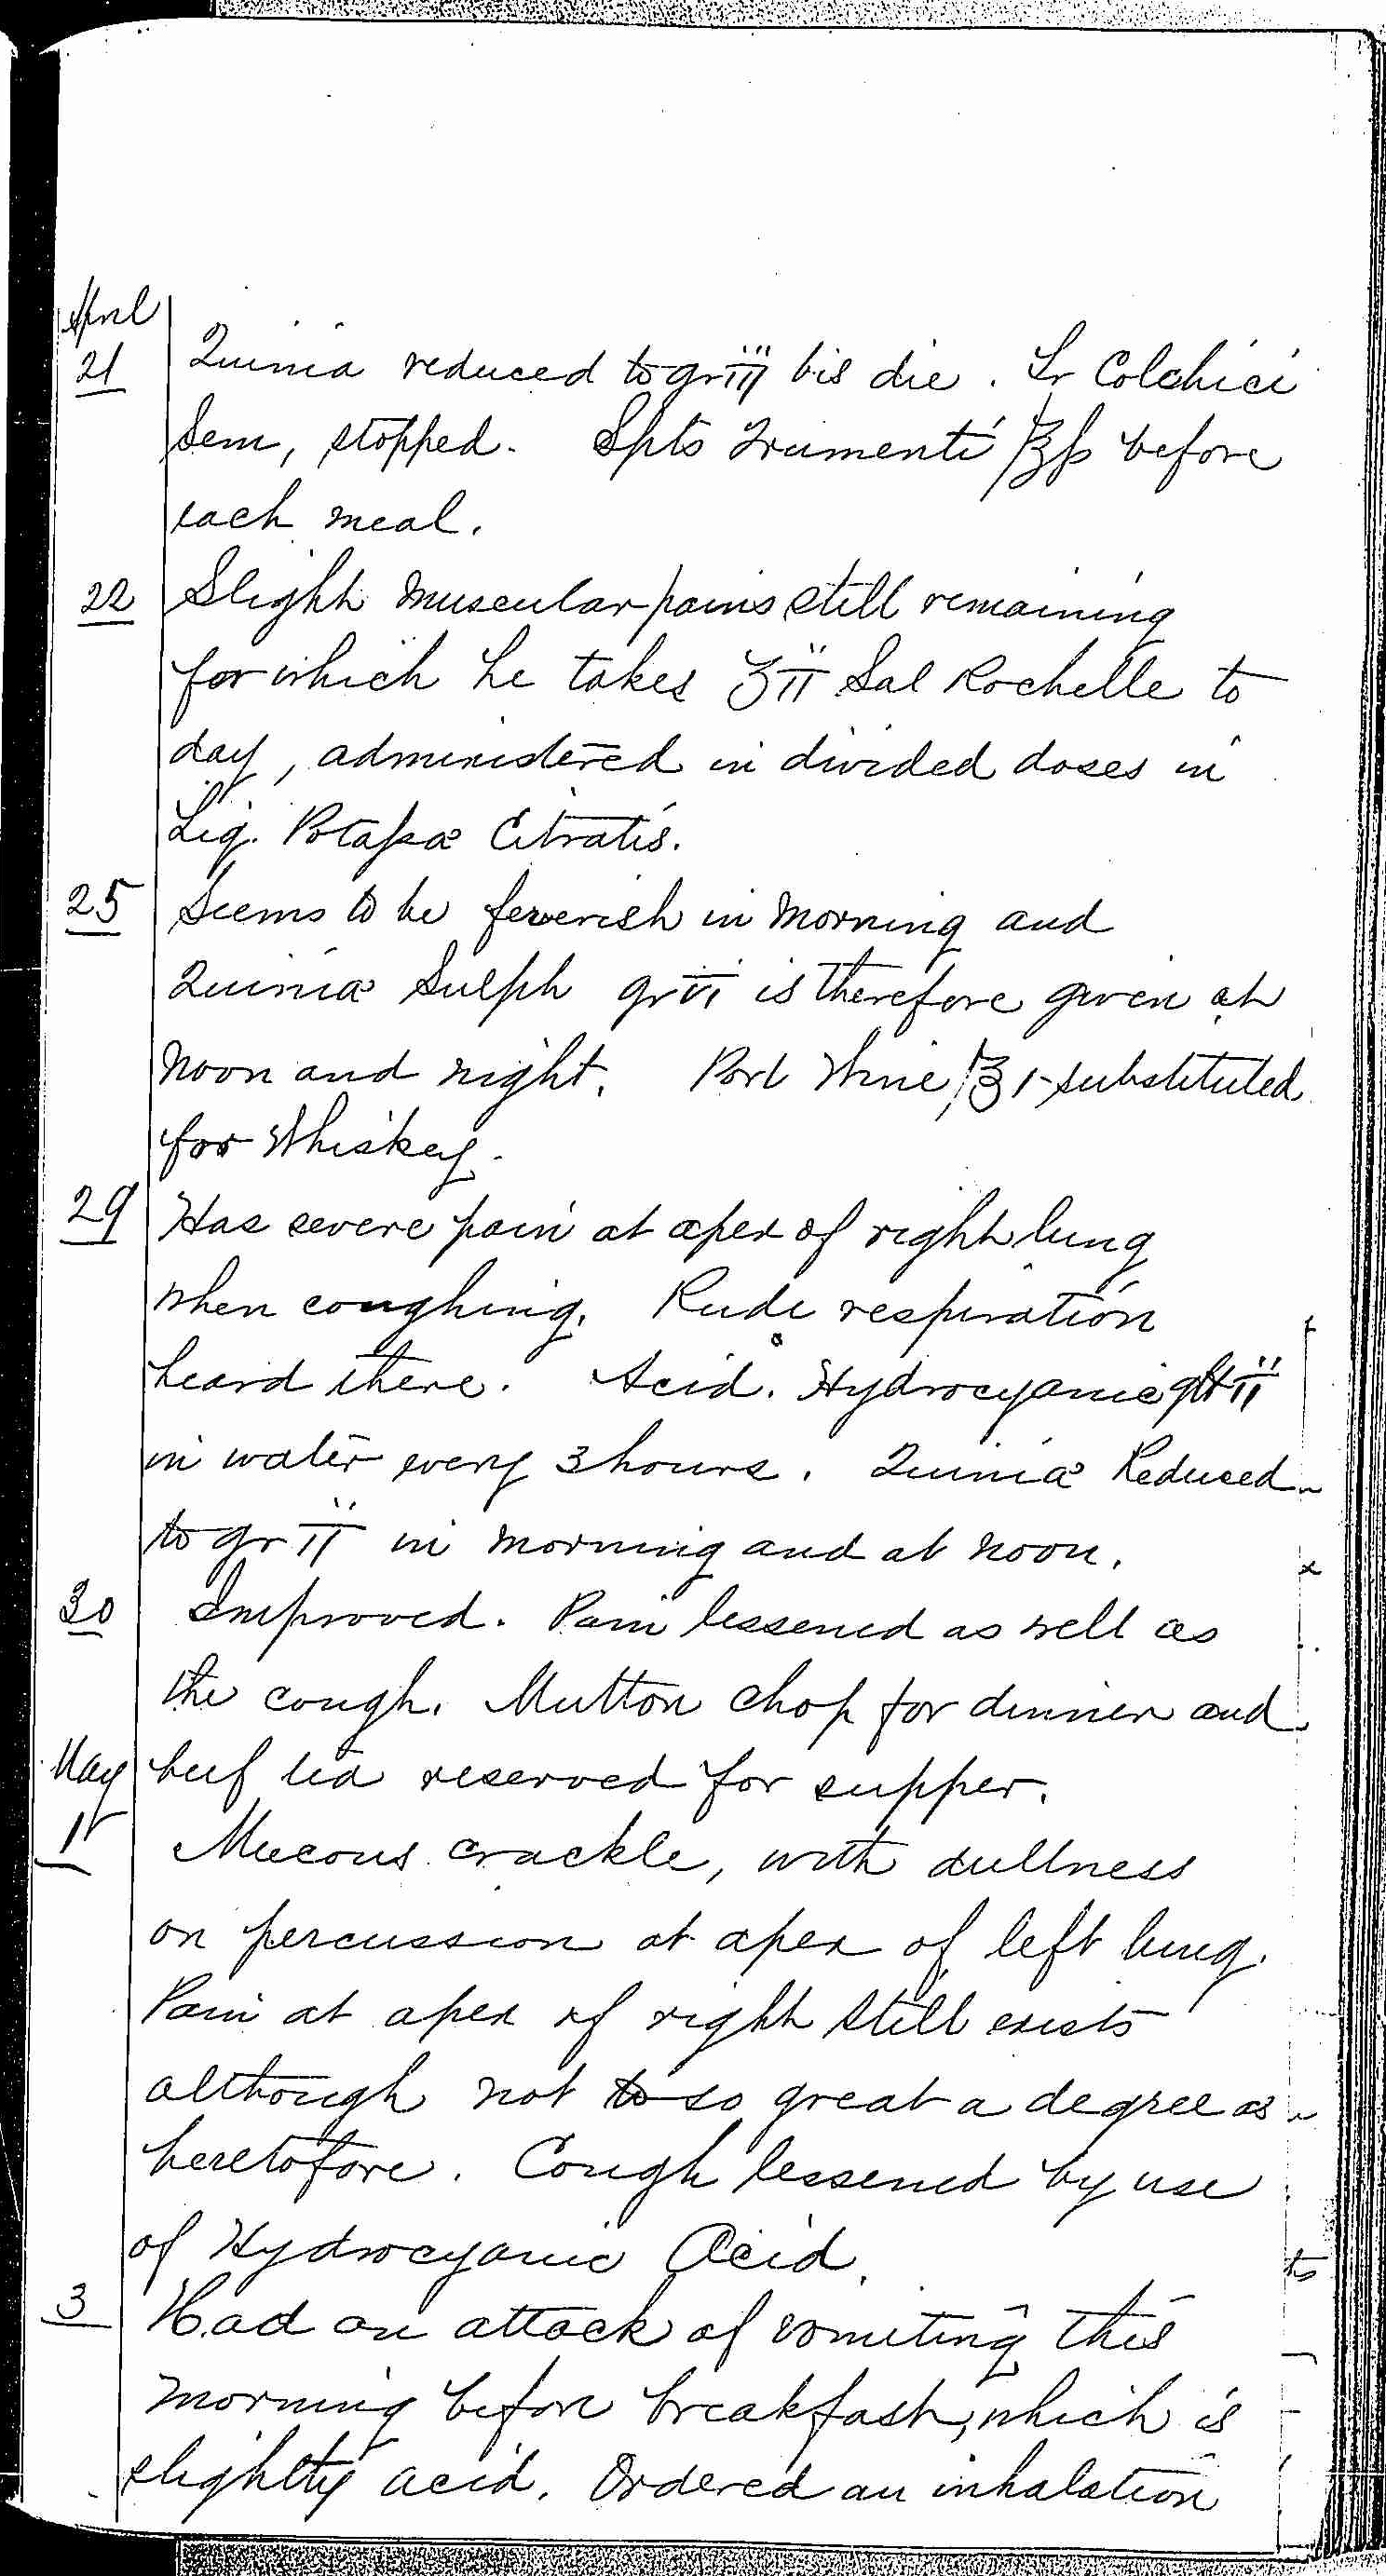 Entry for Richard Forn (page 19 of 21) in the log Hospital Tickets and Case Papers - Naval Hospital - Washington, D.C. - 1868-69